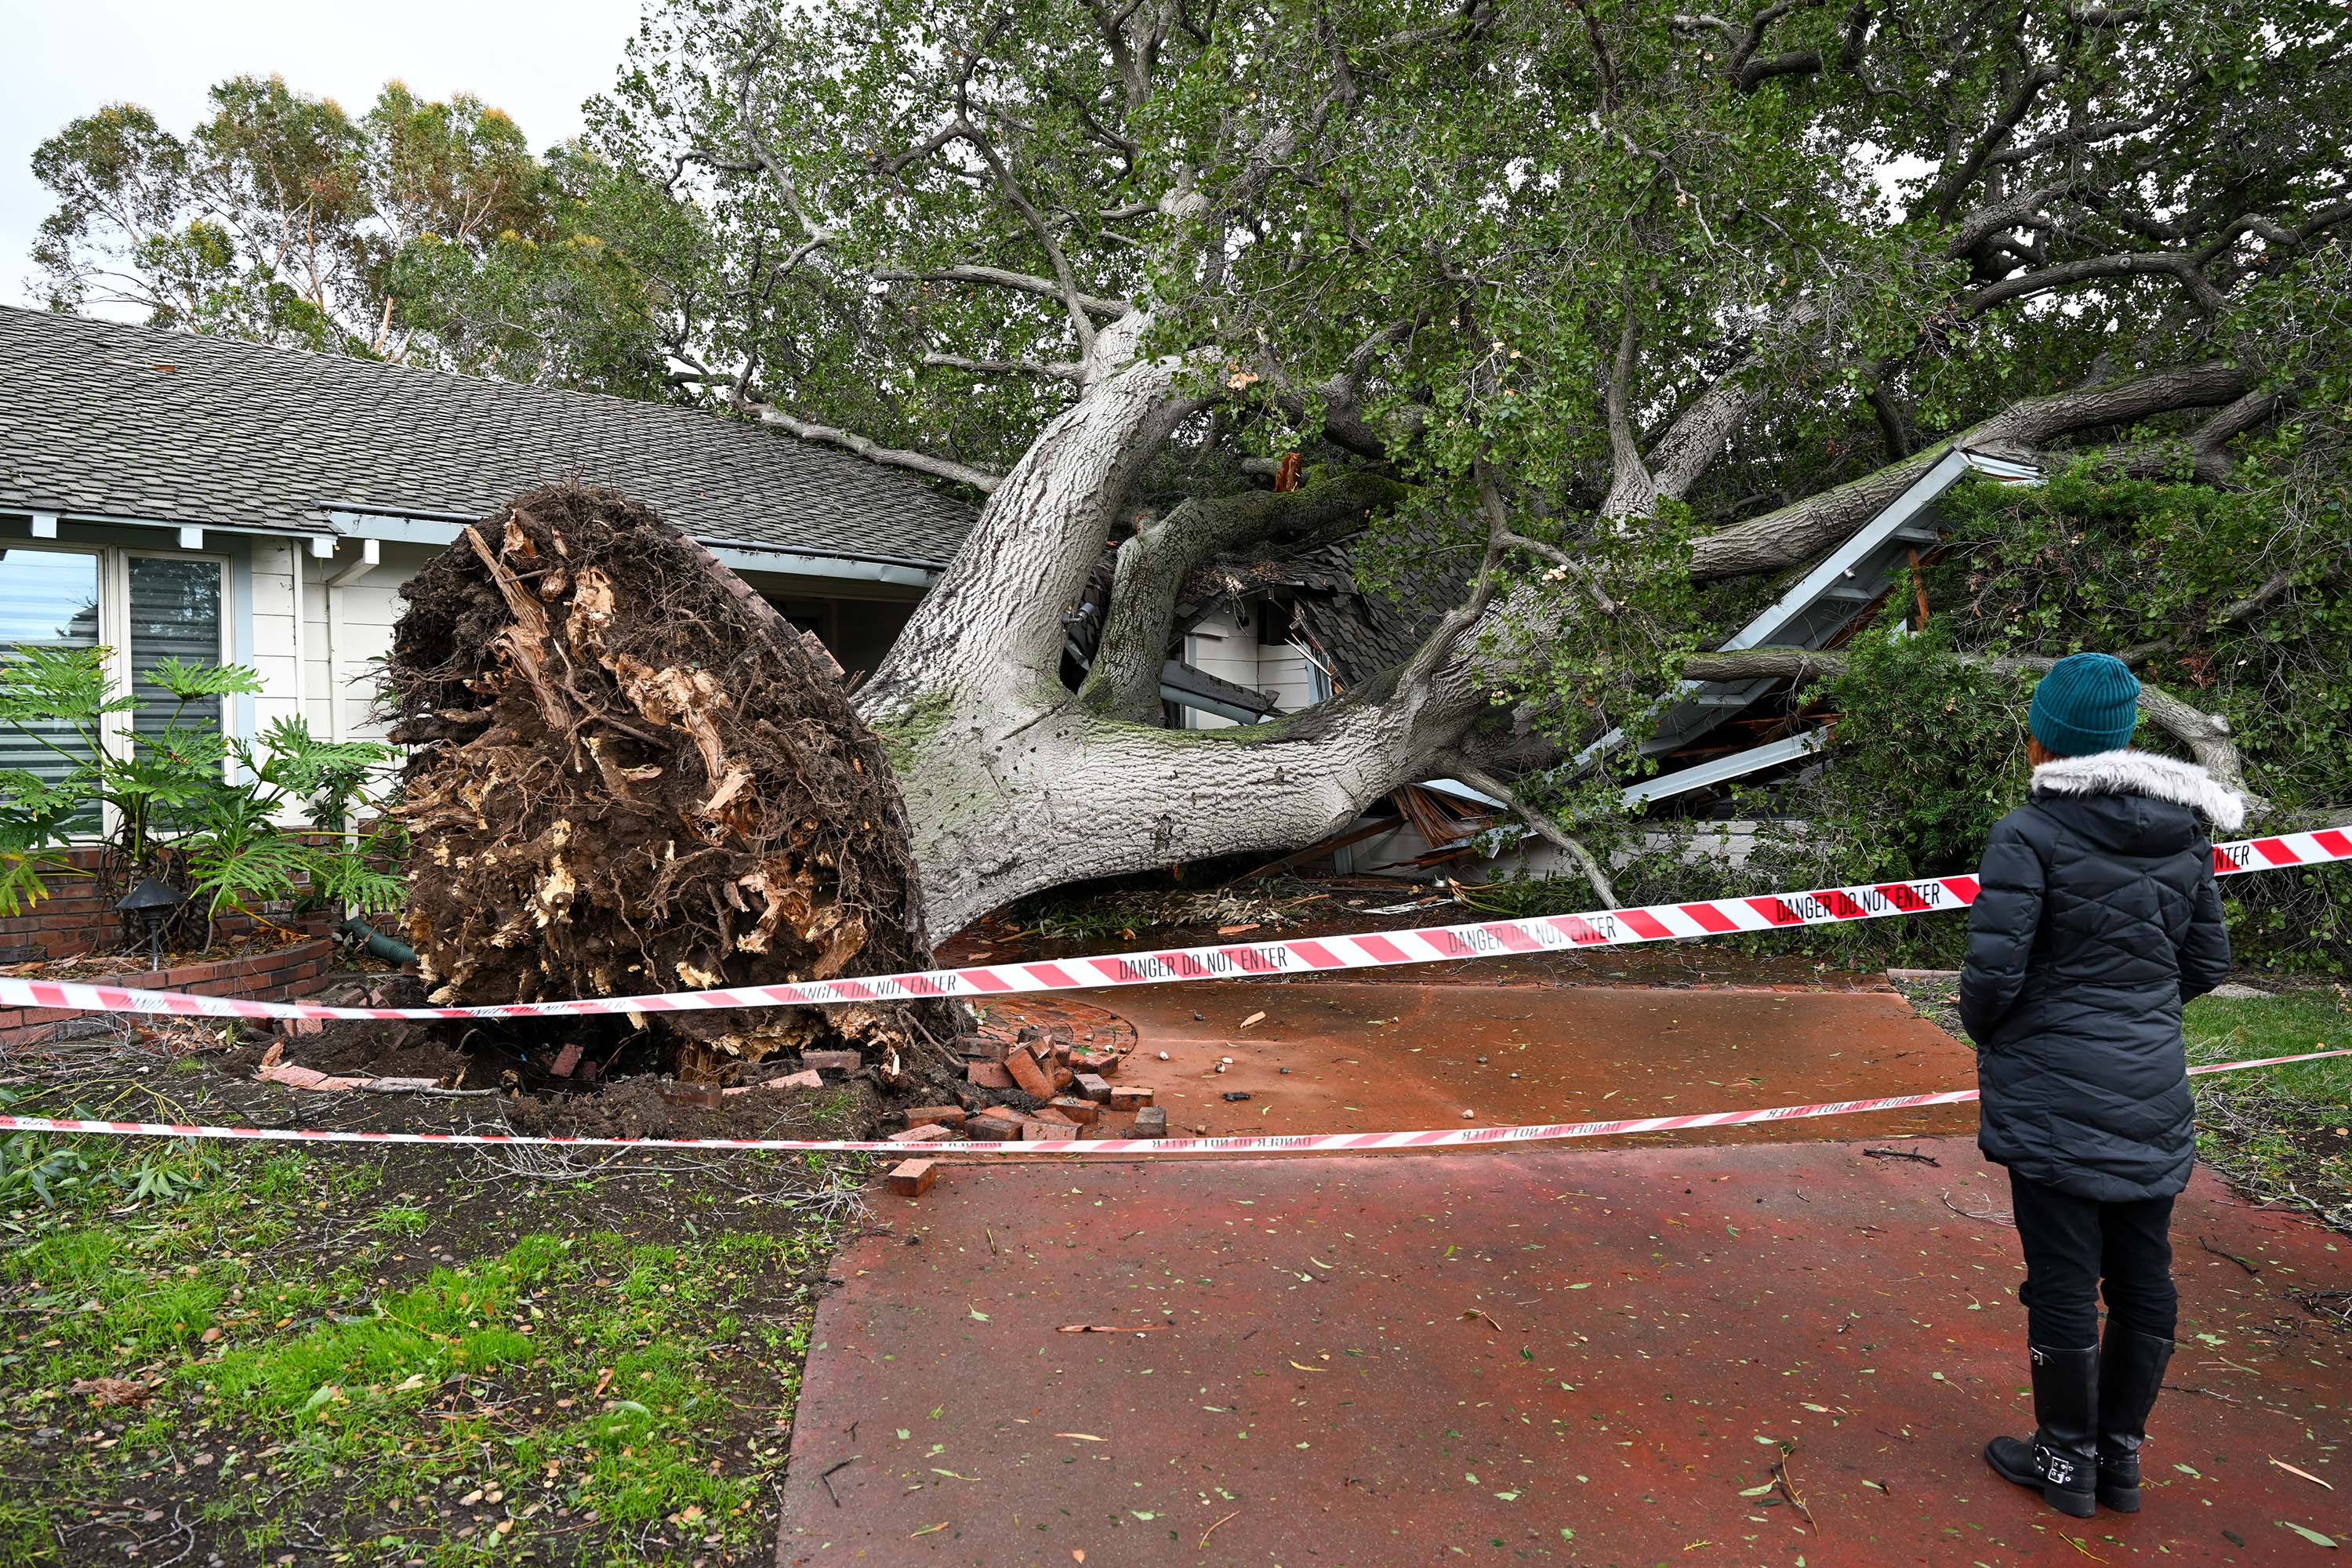 Damage is seen after a tree fell on a house in San Jose, California, on February 4.